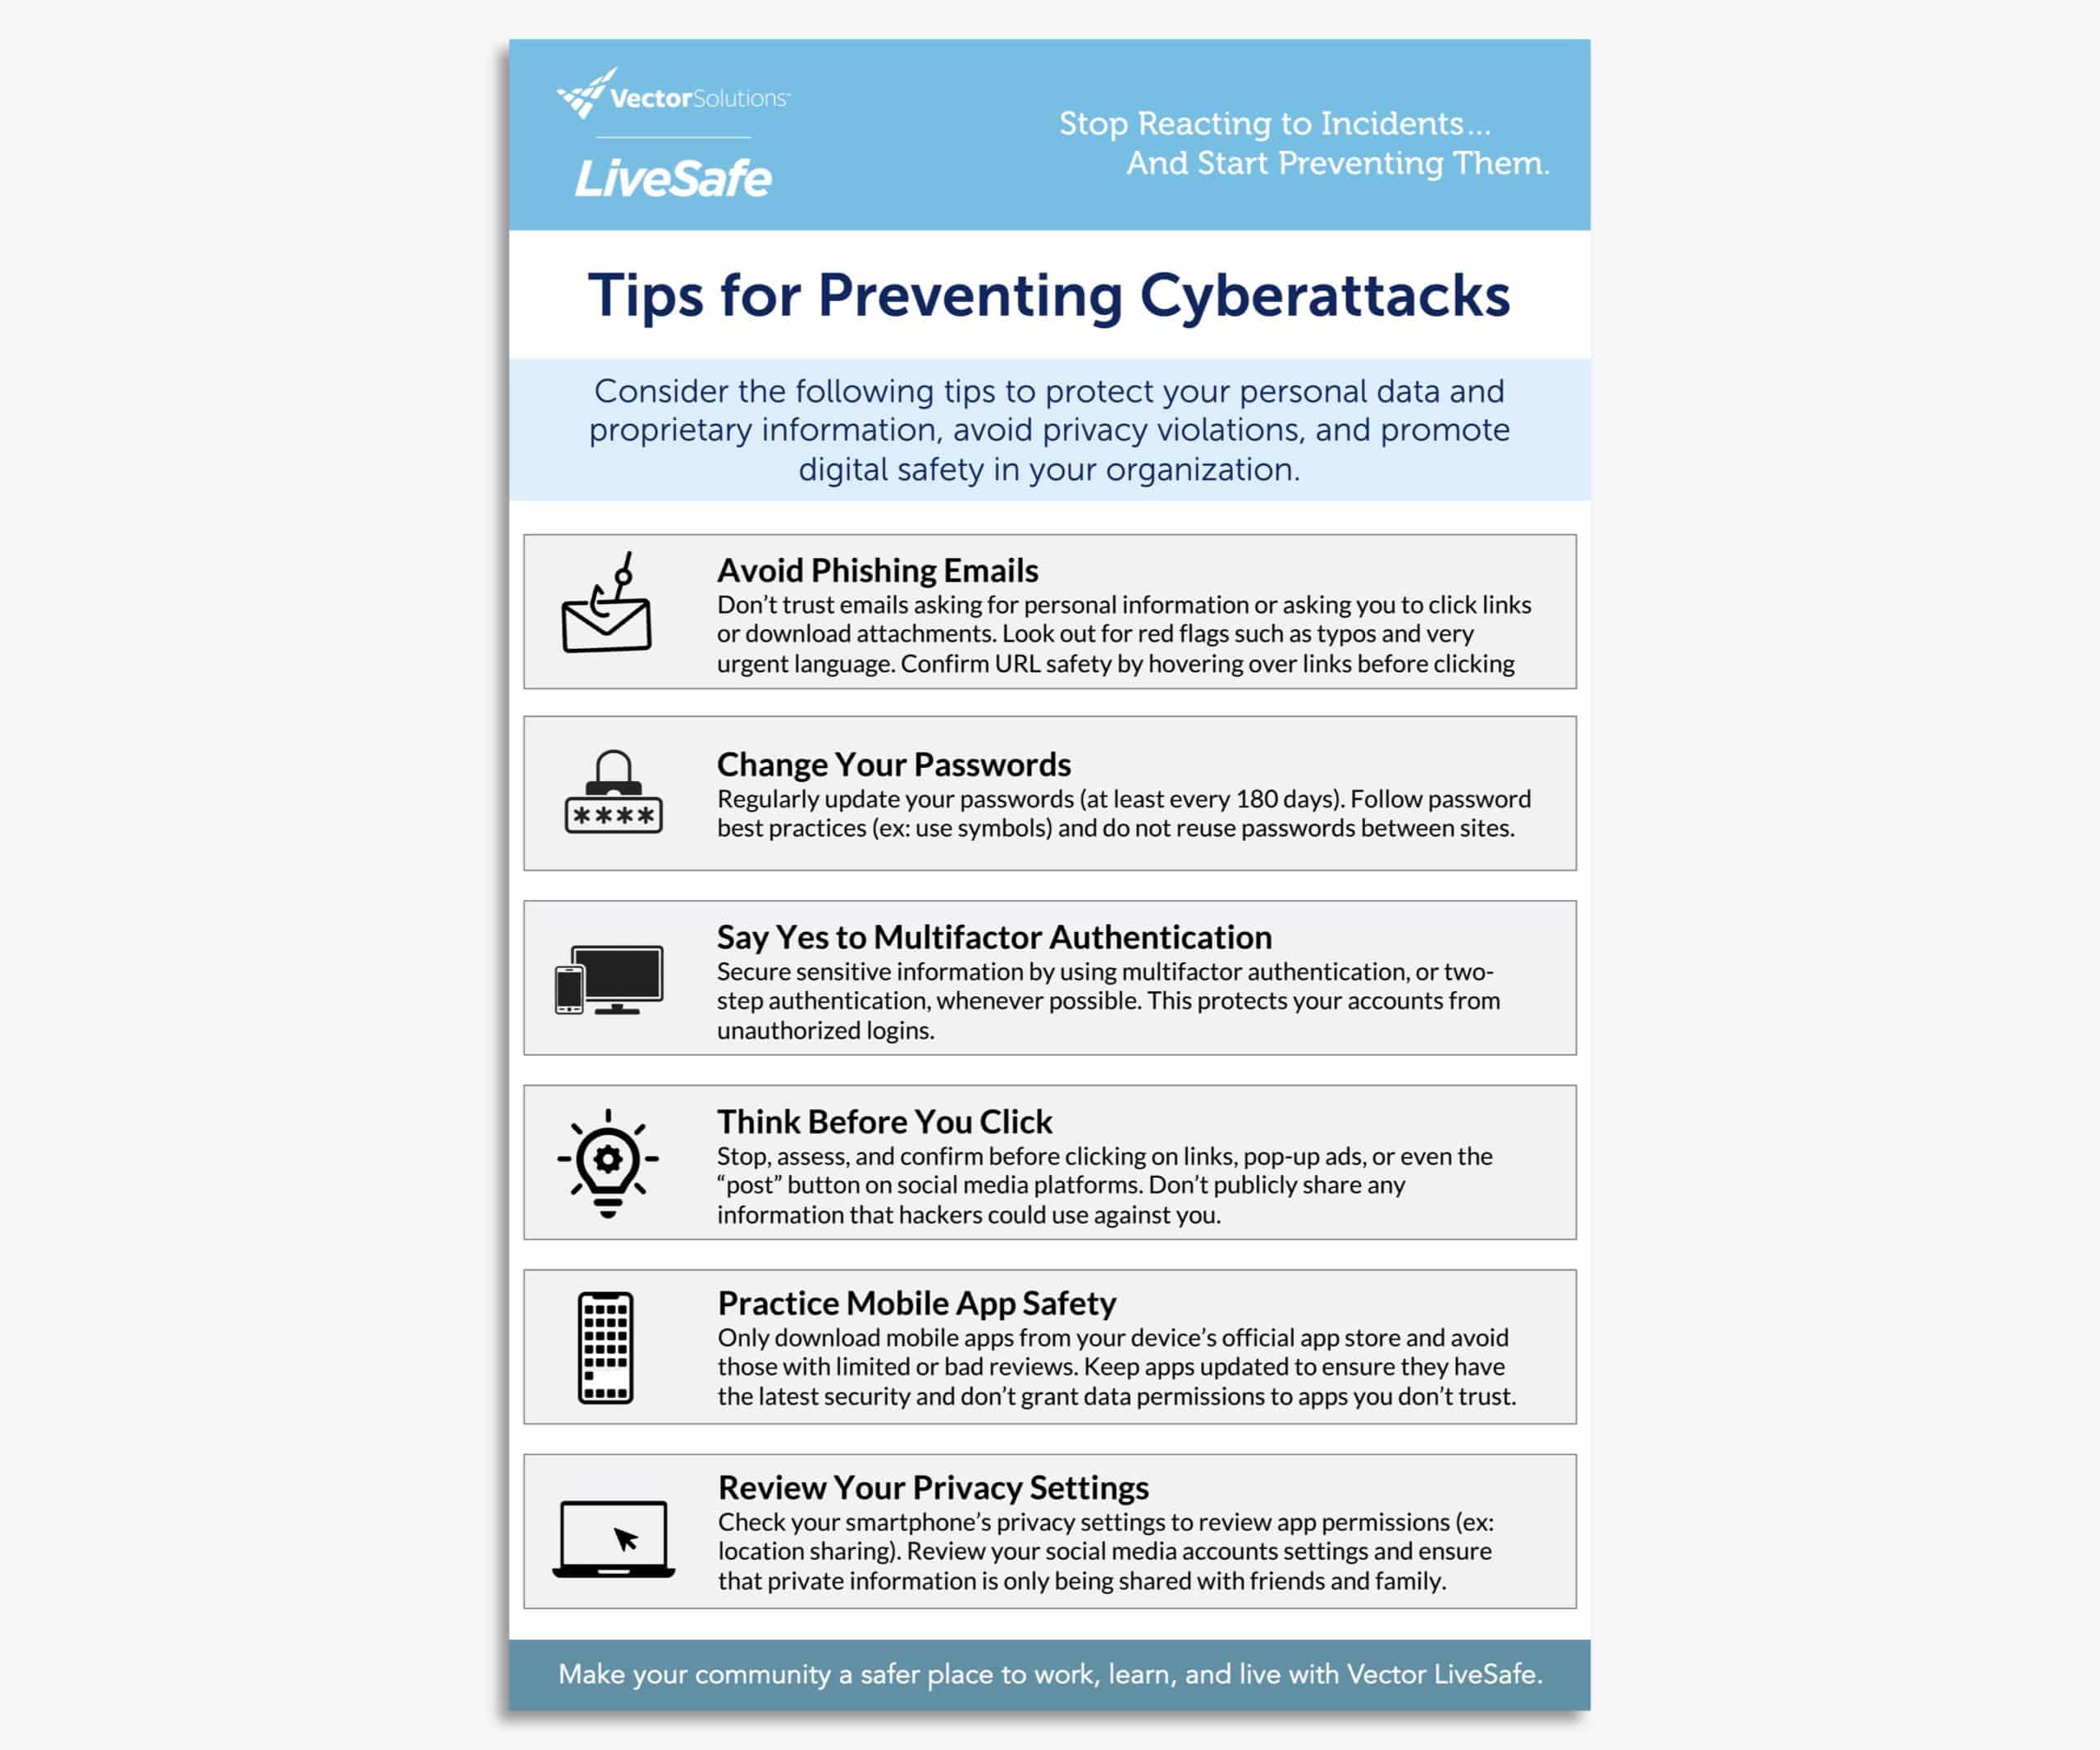 Tips for Preventing Cyberattacks